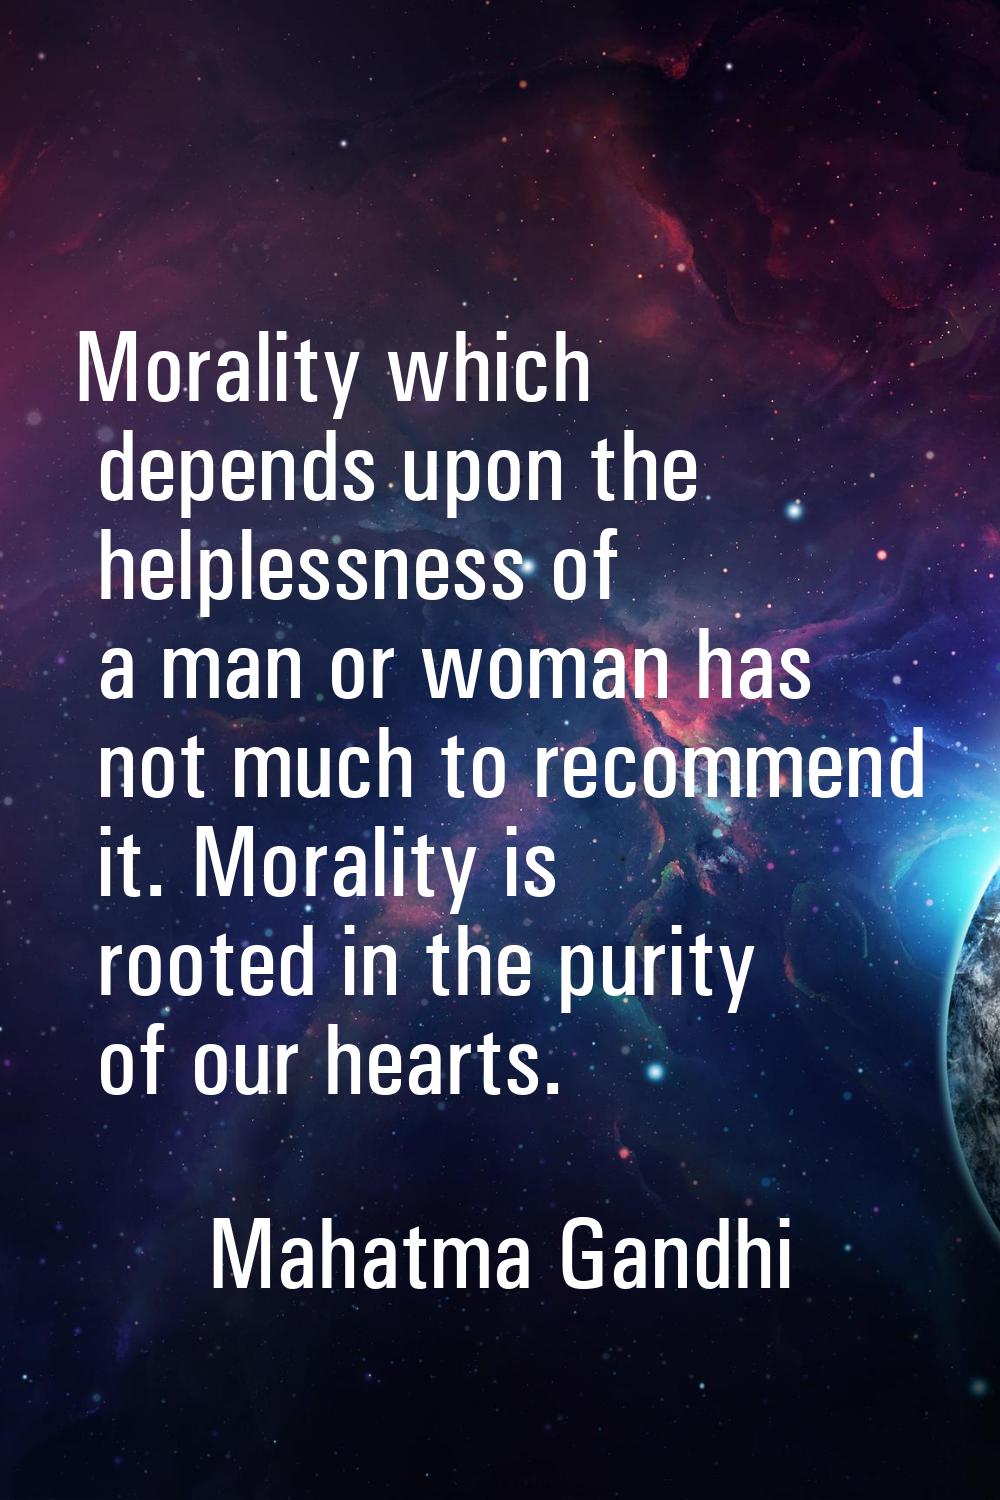 Morality which depends upon the helplessness of a man or woman has not much to recommend it. Morali